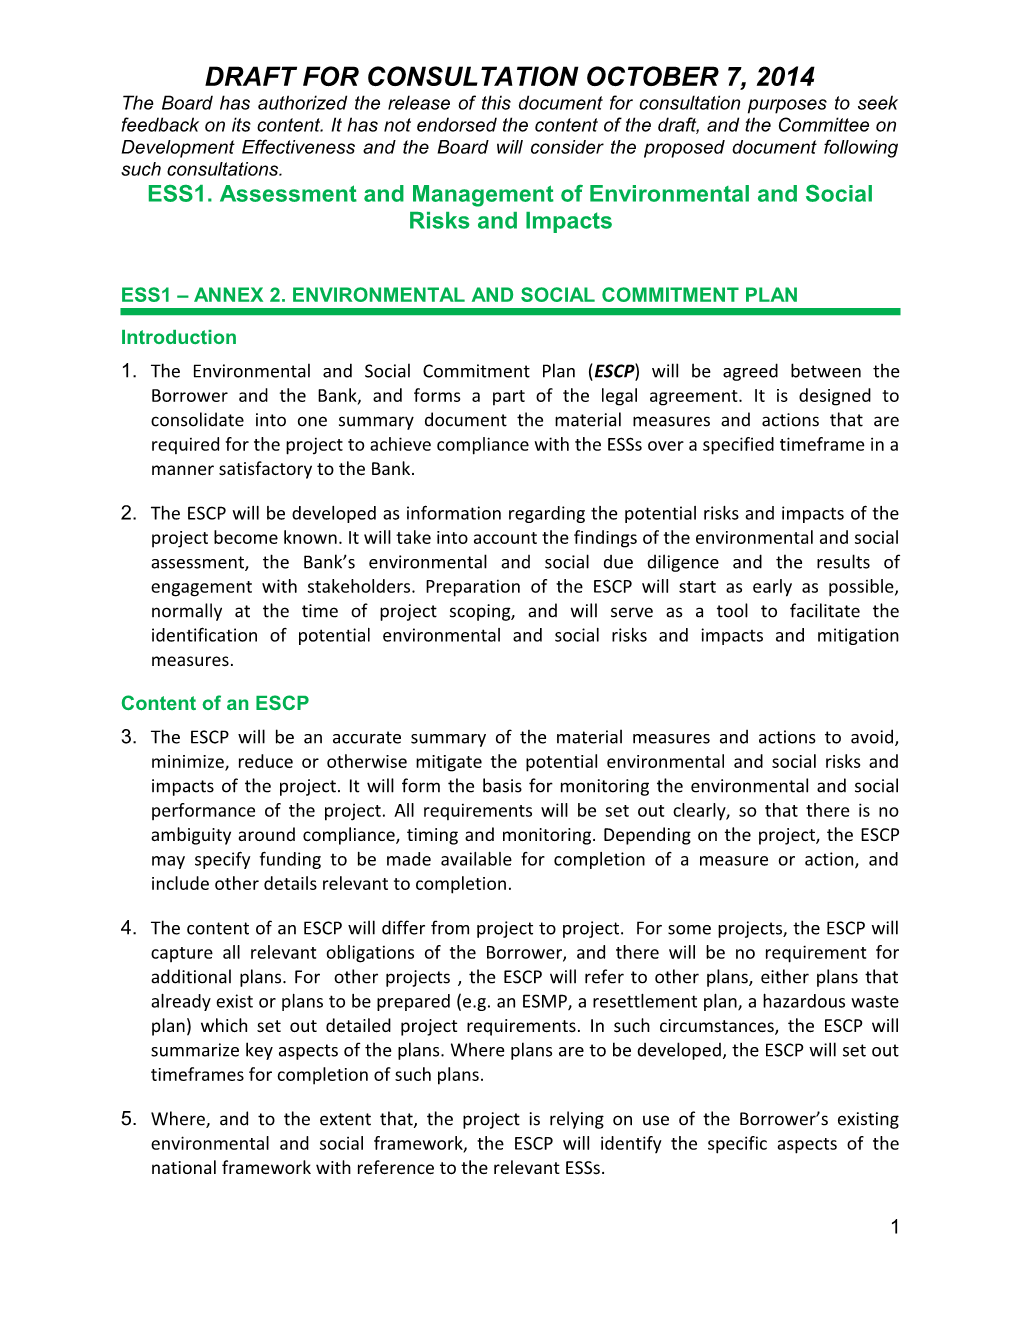 ESS1. Assessment and Management of Environmental and Social Risks and Impacts